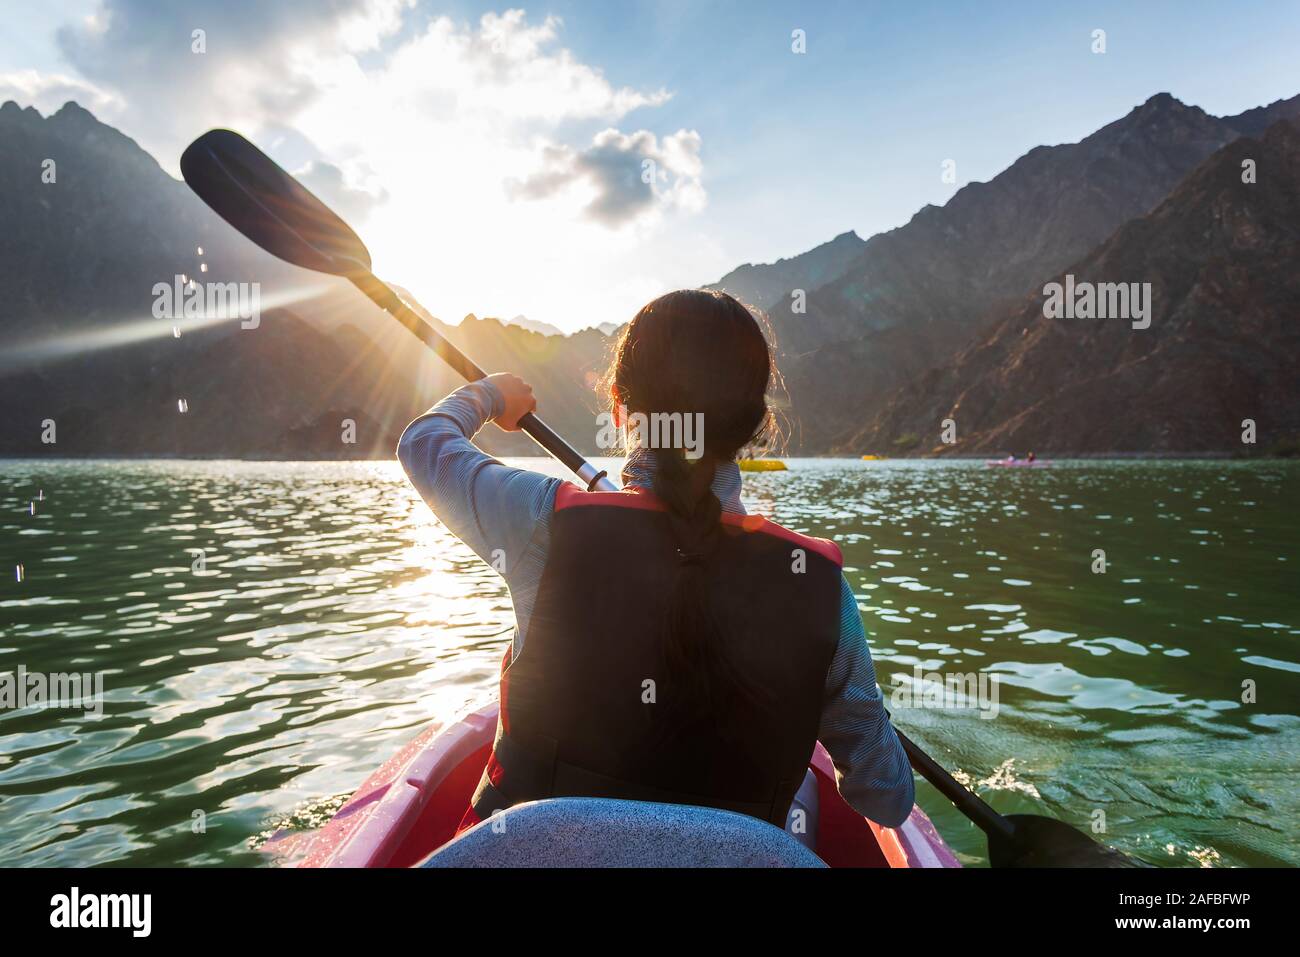 Woman kayaking in a mountain surrounded lake at sunset Stock Photo